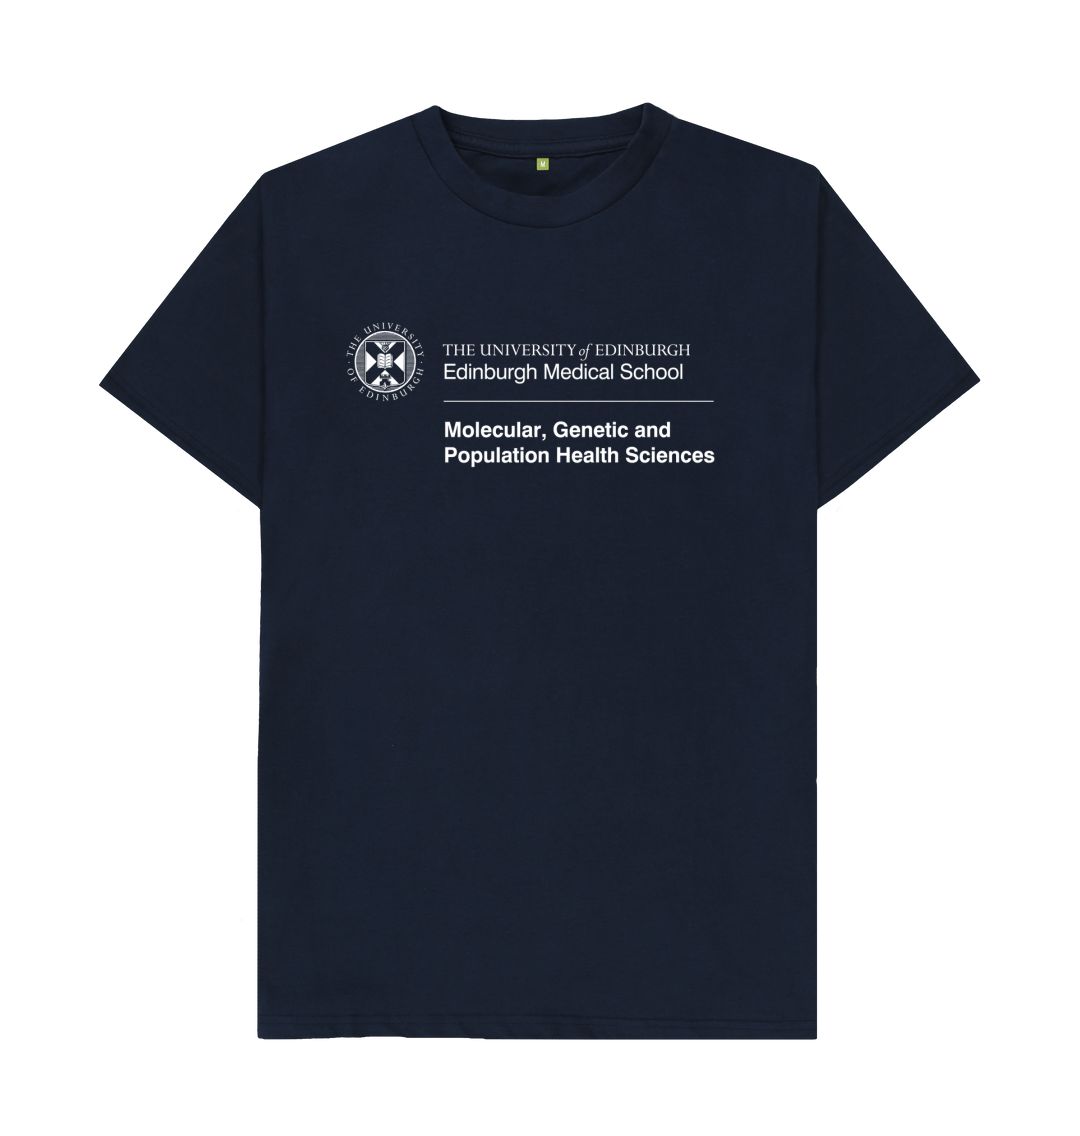 Navy T -Shirt  with white University crest and text that reads ' University of Edinburgh : Edinburgh Medical School - Molecular, Genetic and PopulationHealth Sciences'